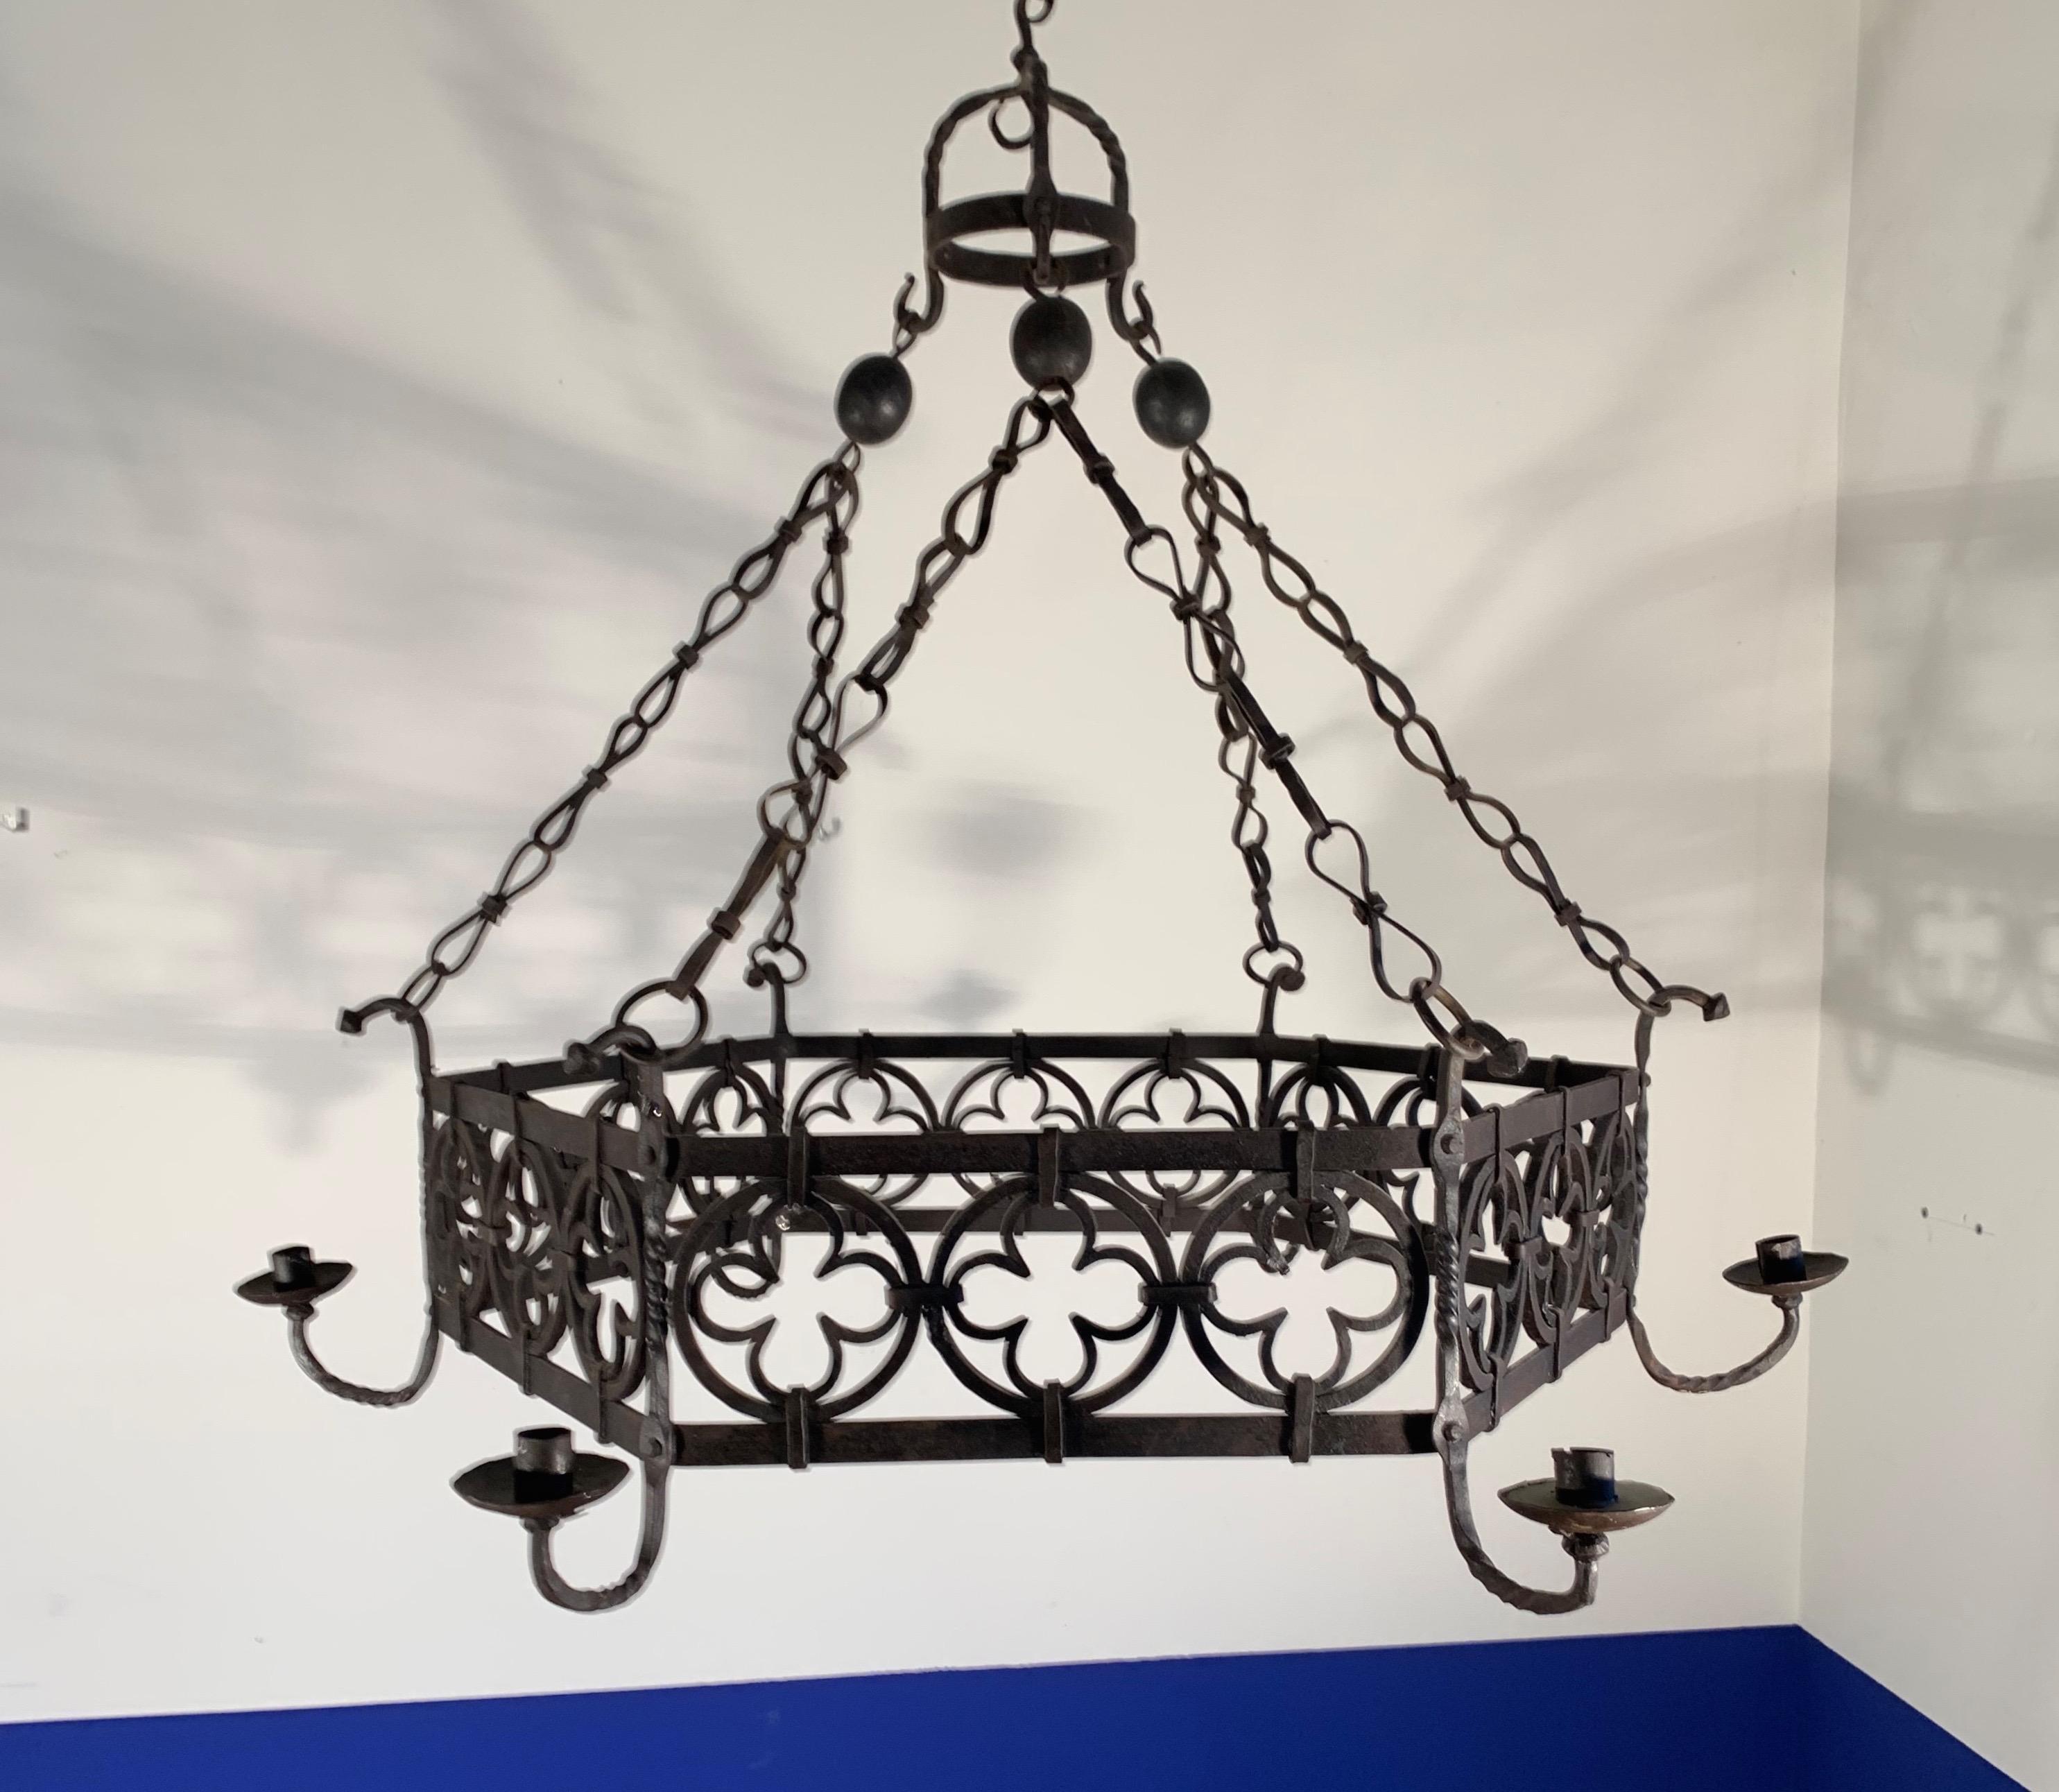 Large Gothic Revival Wrought Iron Chandelier for Dining Room / Restaurant Etc For Sale 2